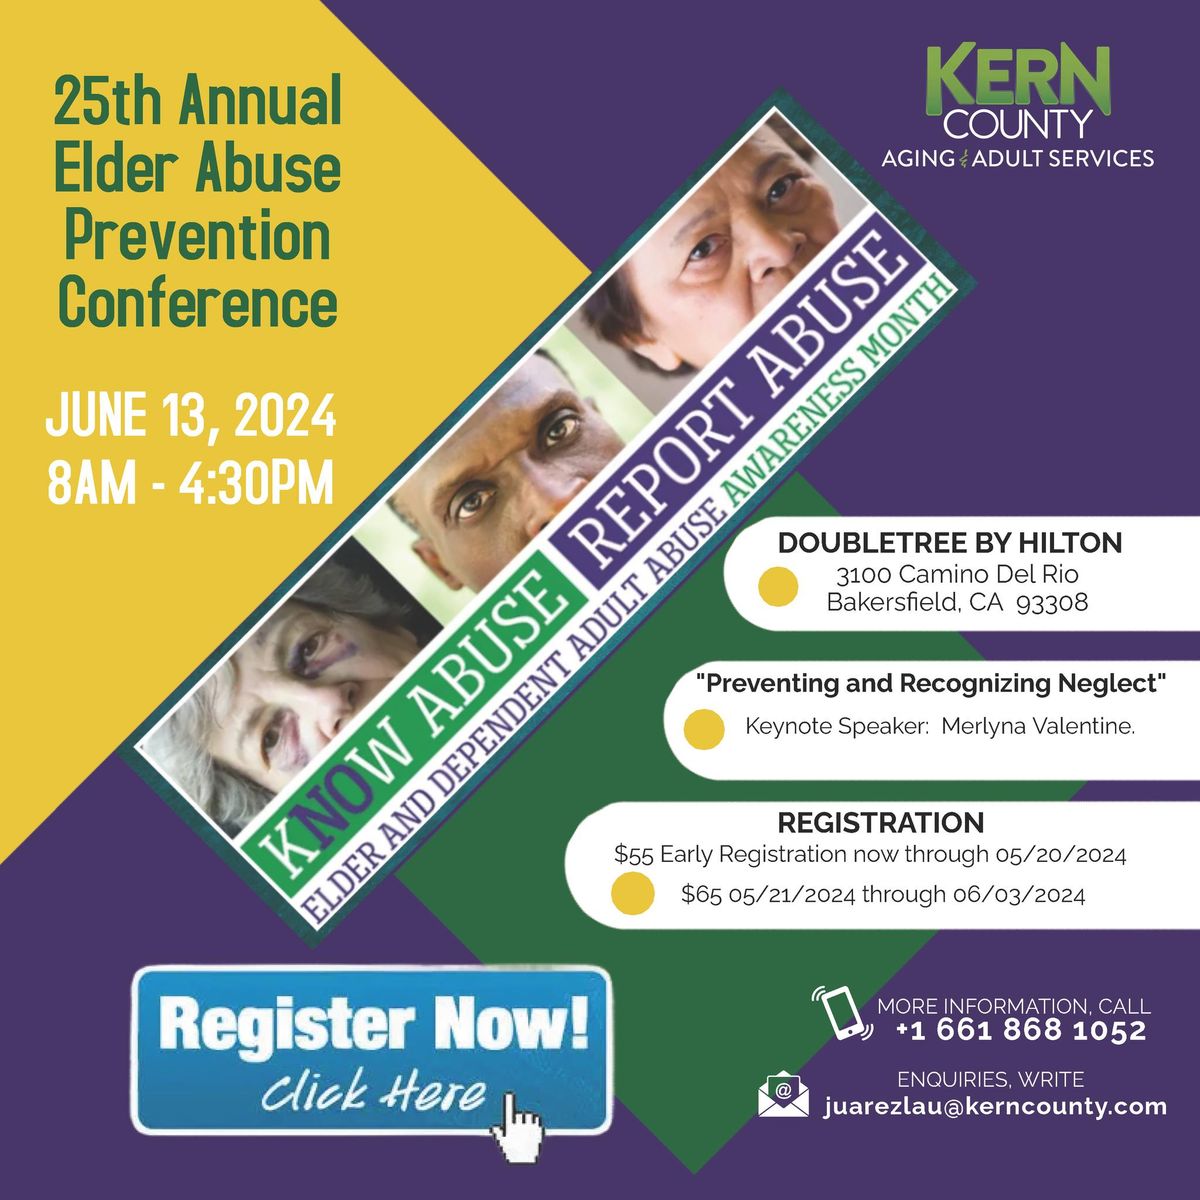 25th Annual Elder Abuse Prevention Conference